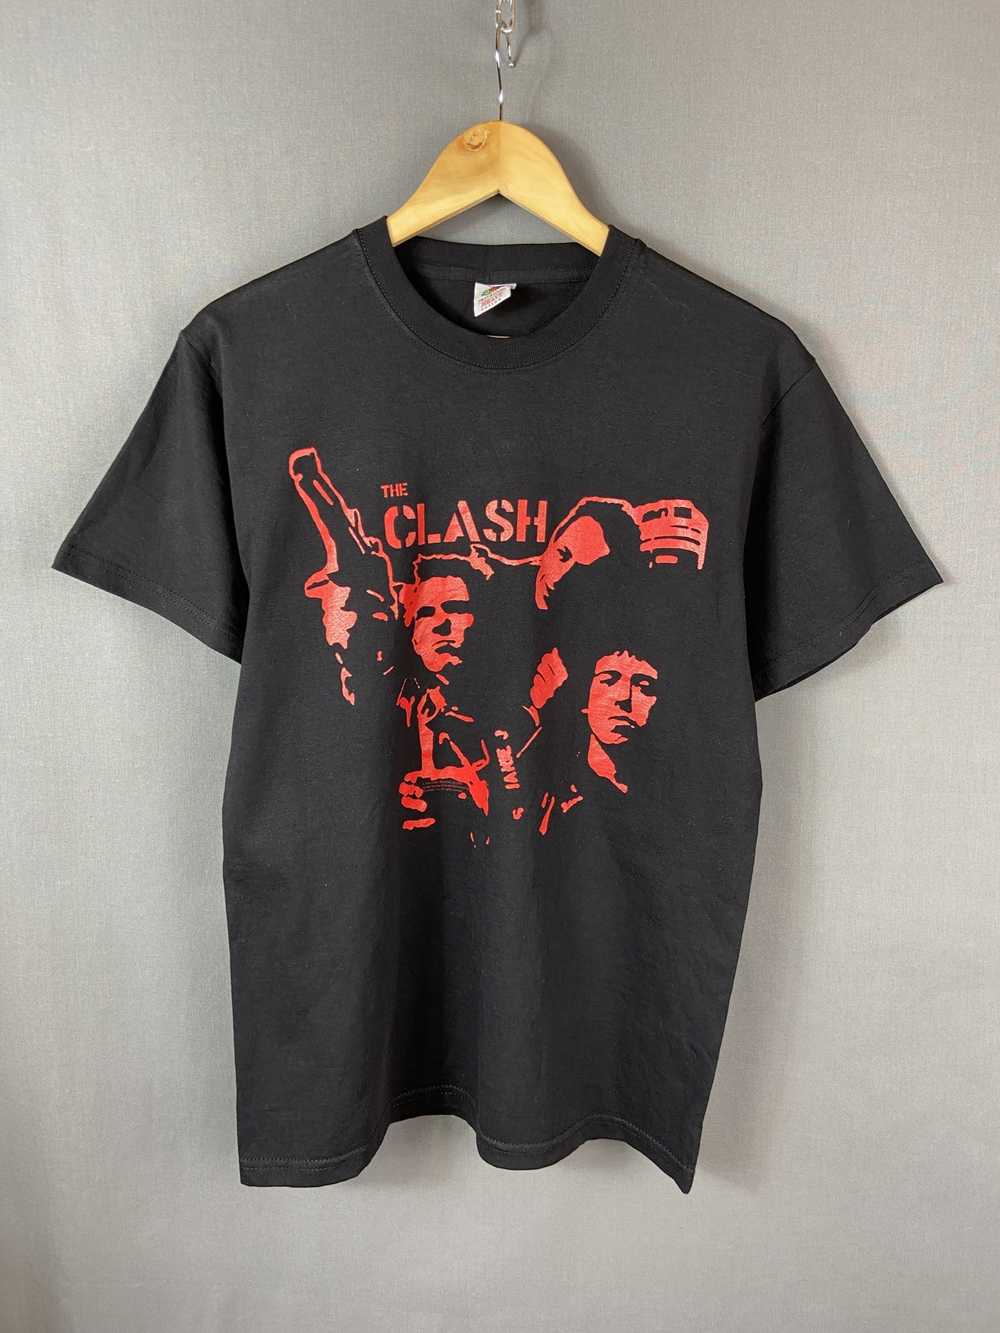 Band Tees × Vintage Vintage 2004 The Clash band t… - image 1